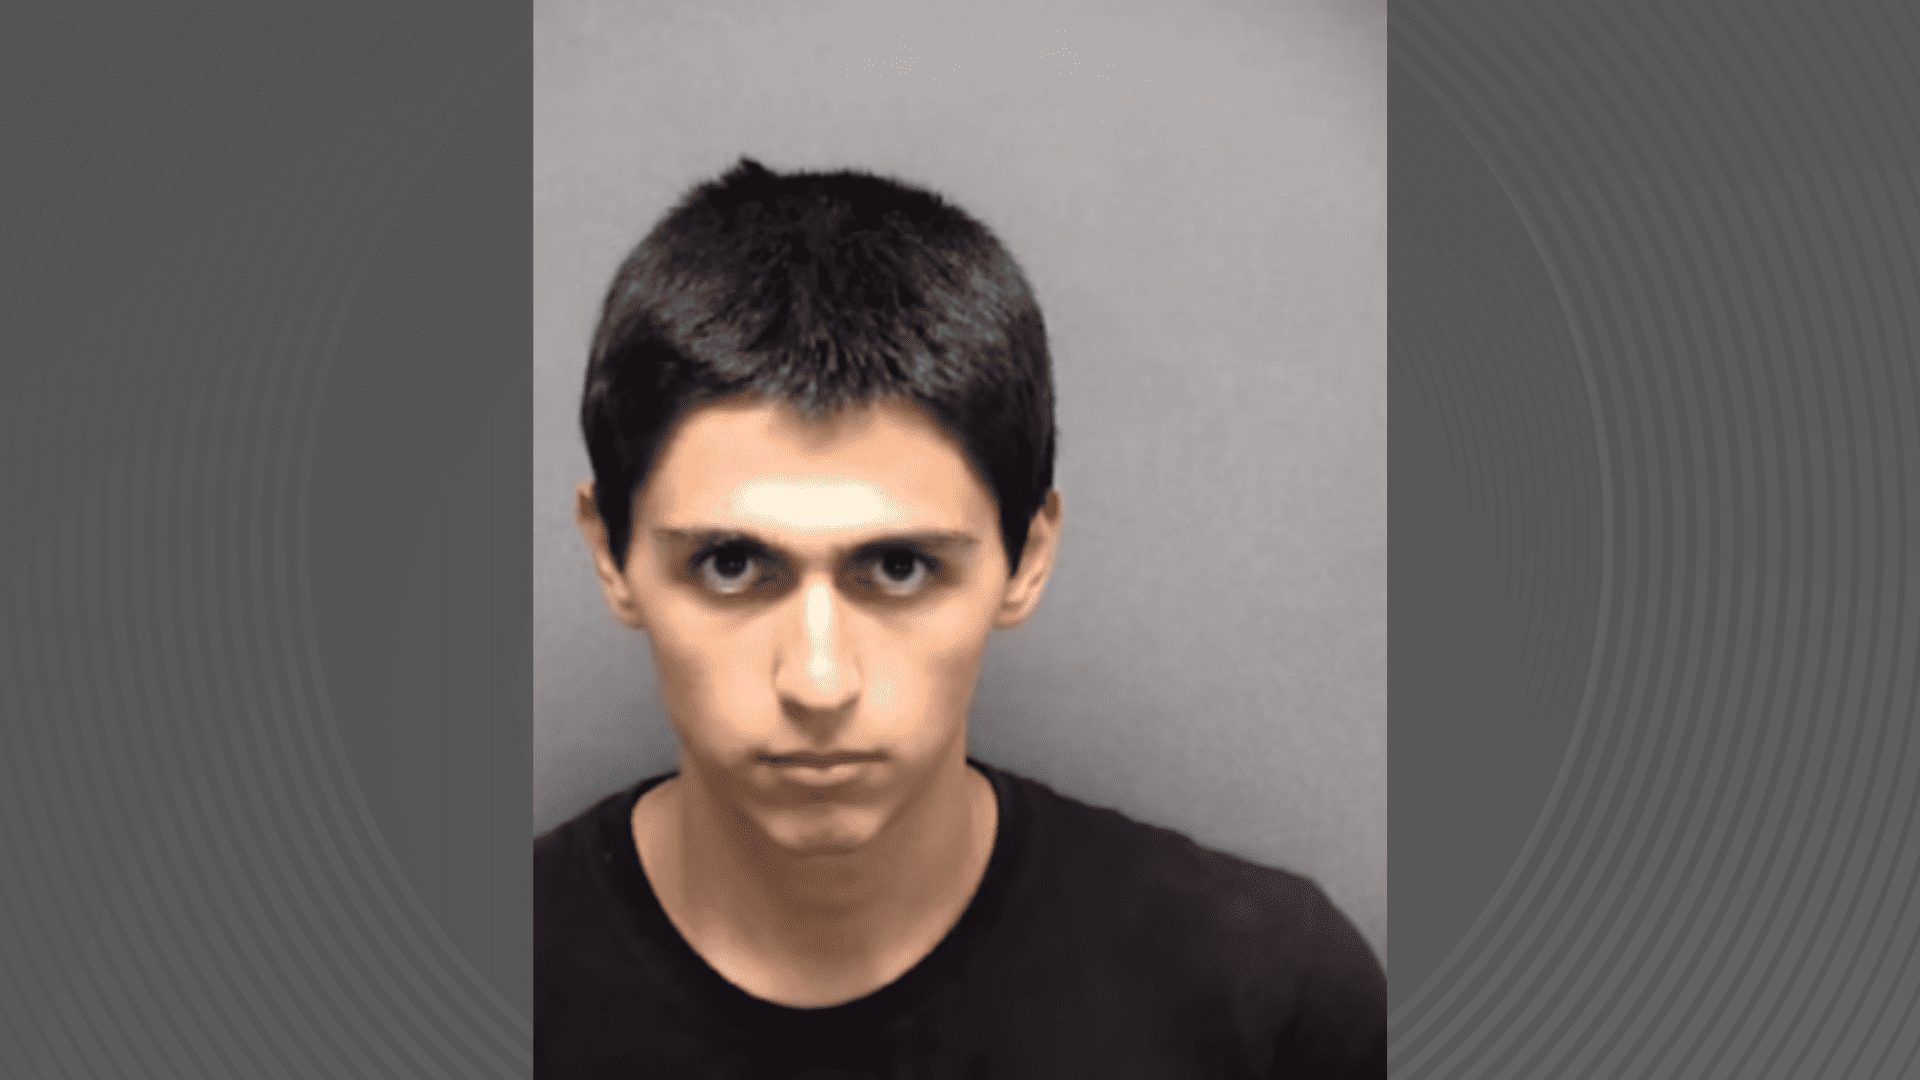 Rodolfo Valdivia Aceves, 19, is charged with terroristic threat